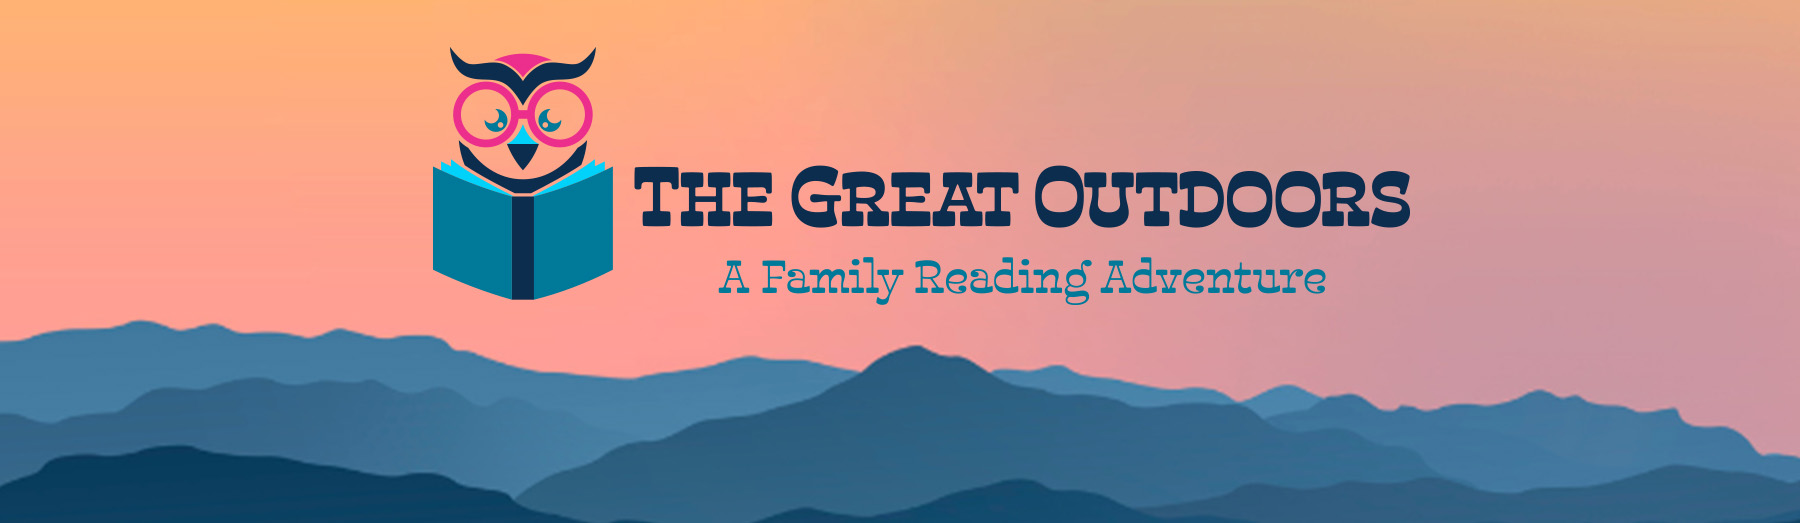 The Great Outdoors: A Family Reading Adventure